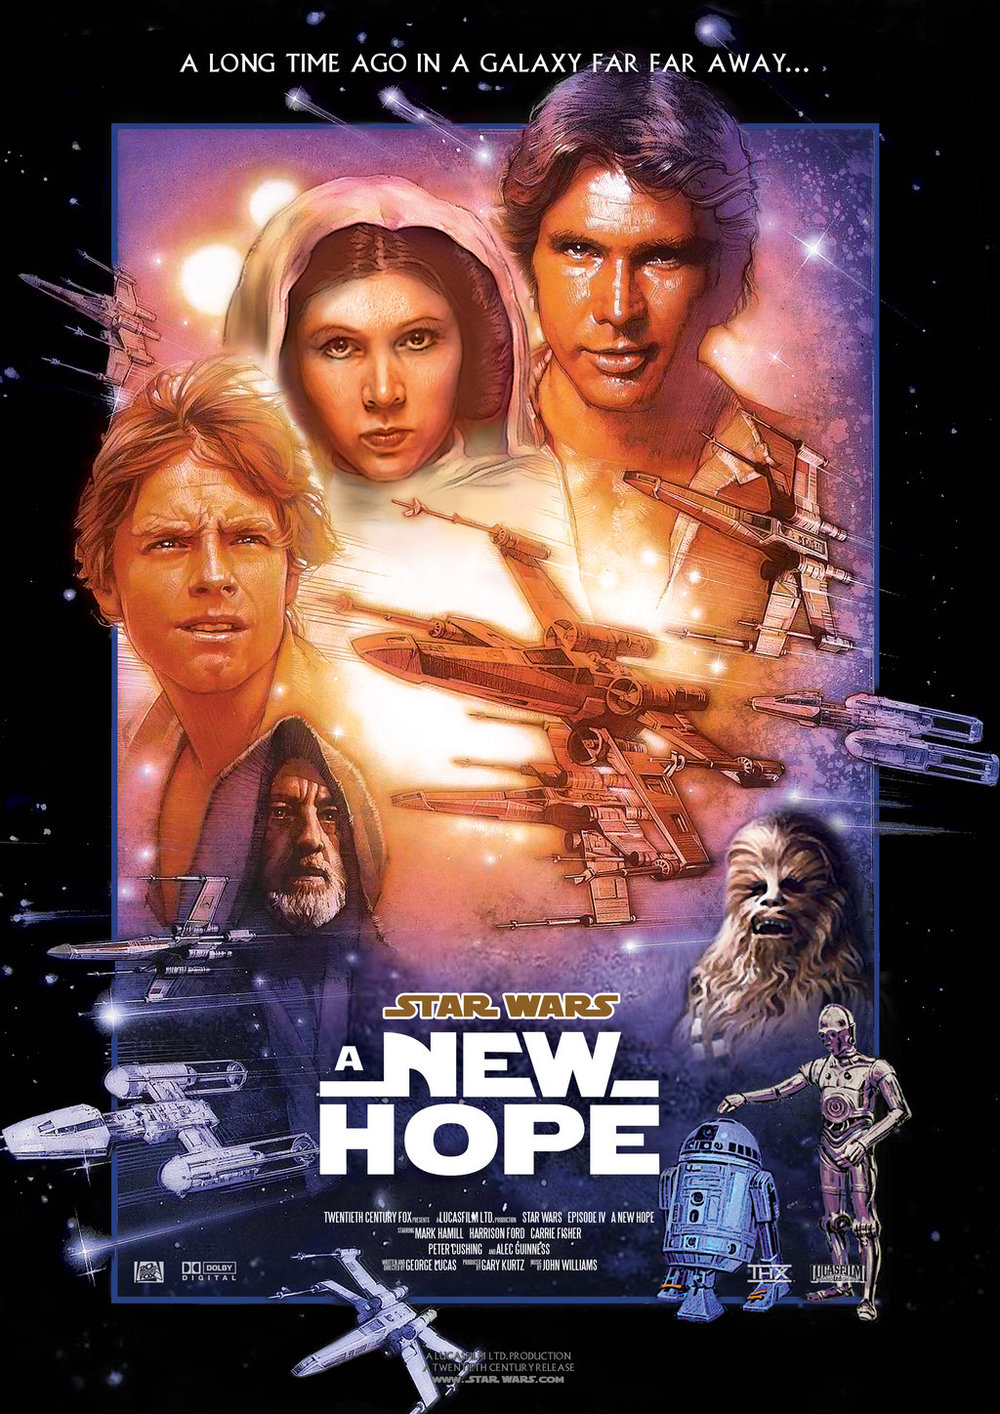 star_wars_iv___a_new_hope___movie_poster_by_nei1b-d5t3cw9.jpg